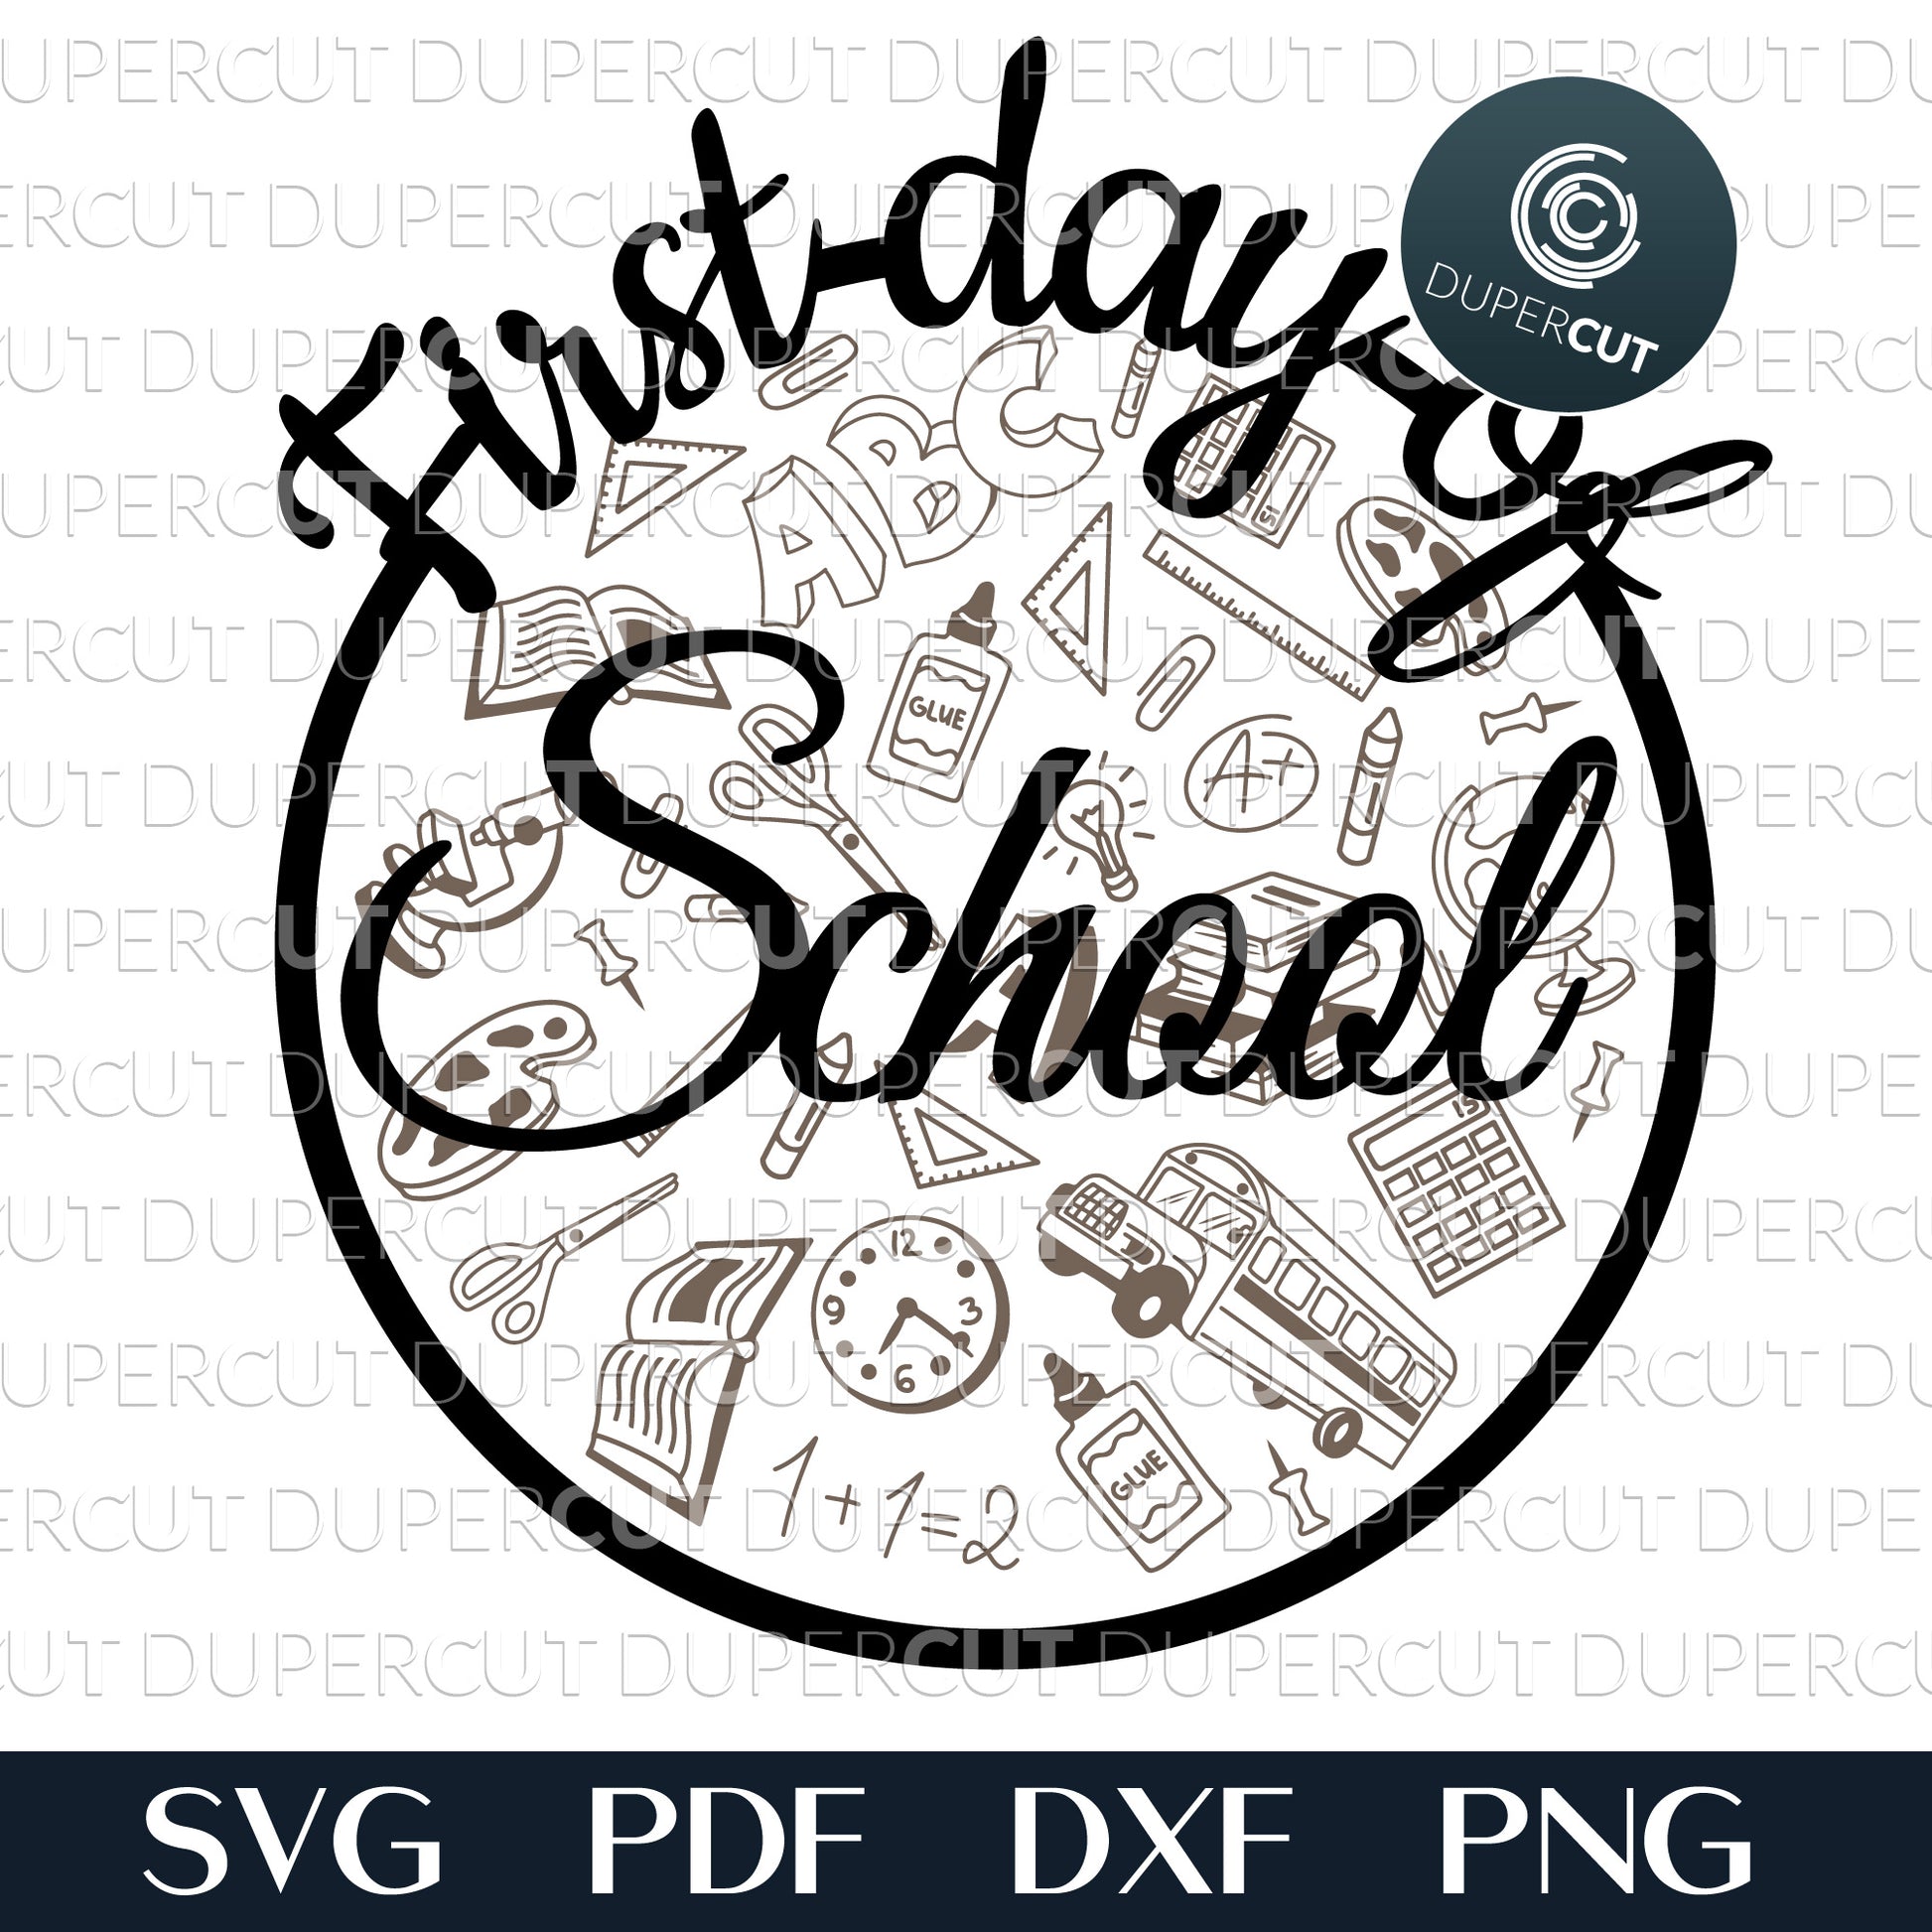 Back to school sign - First day of Grades 1 to 5 - SVG PDF layered files for laser cutting and engraving, Glowforge, Cricut, Silhouette, CNC plasma